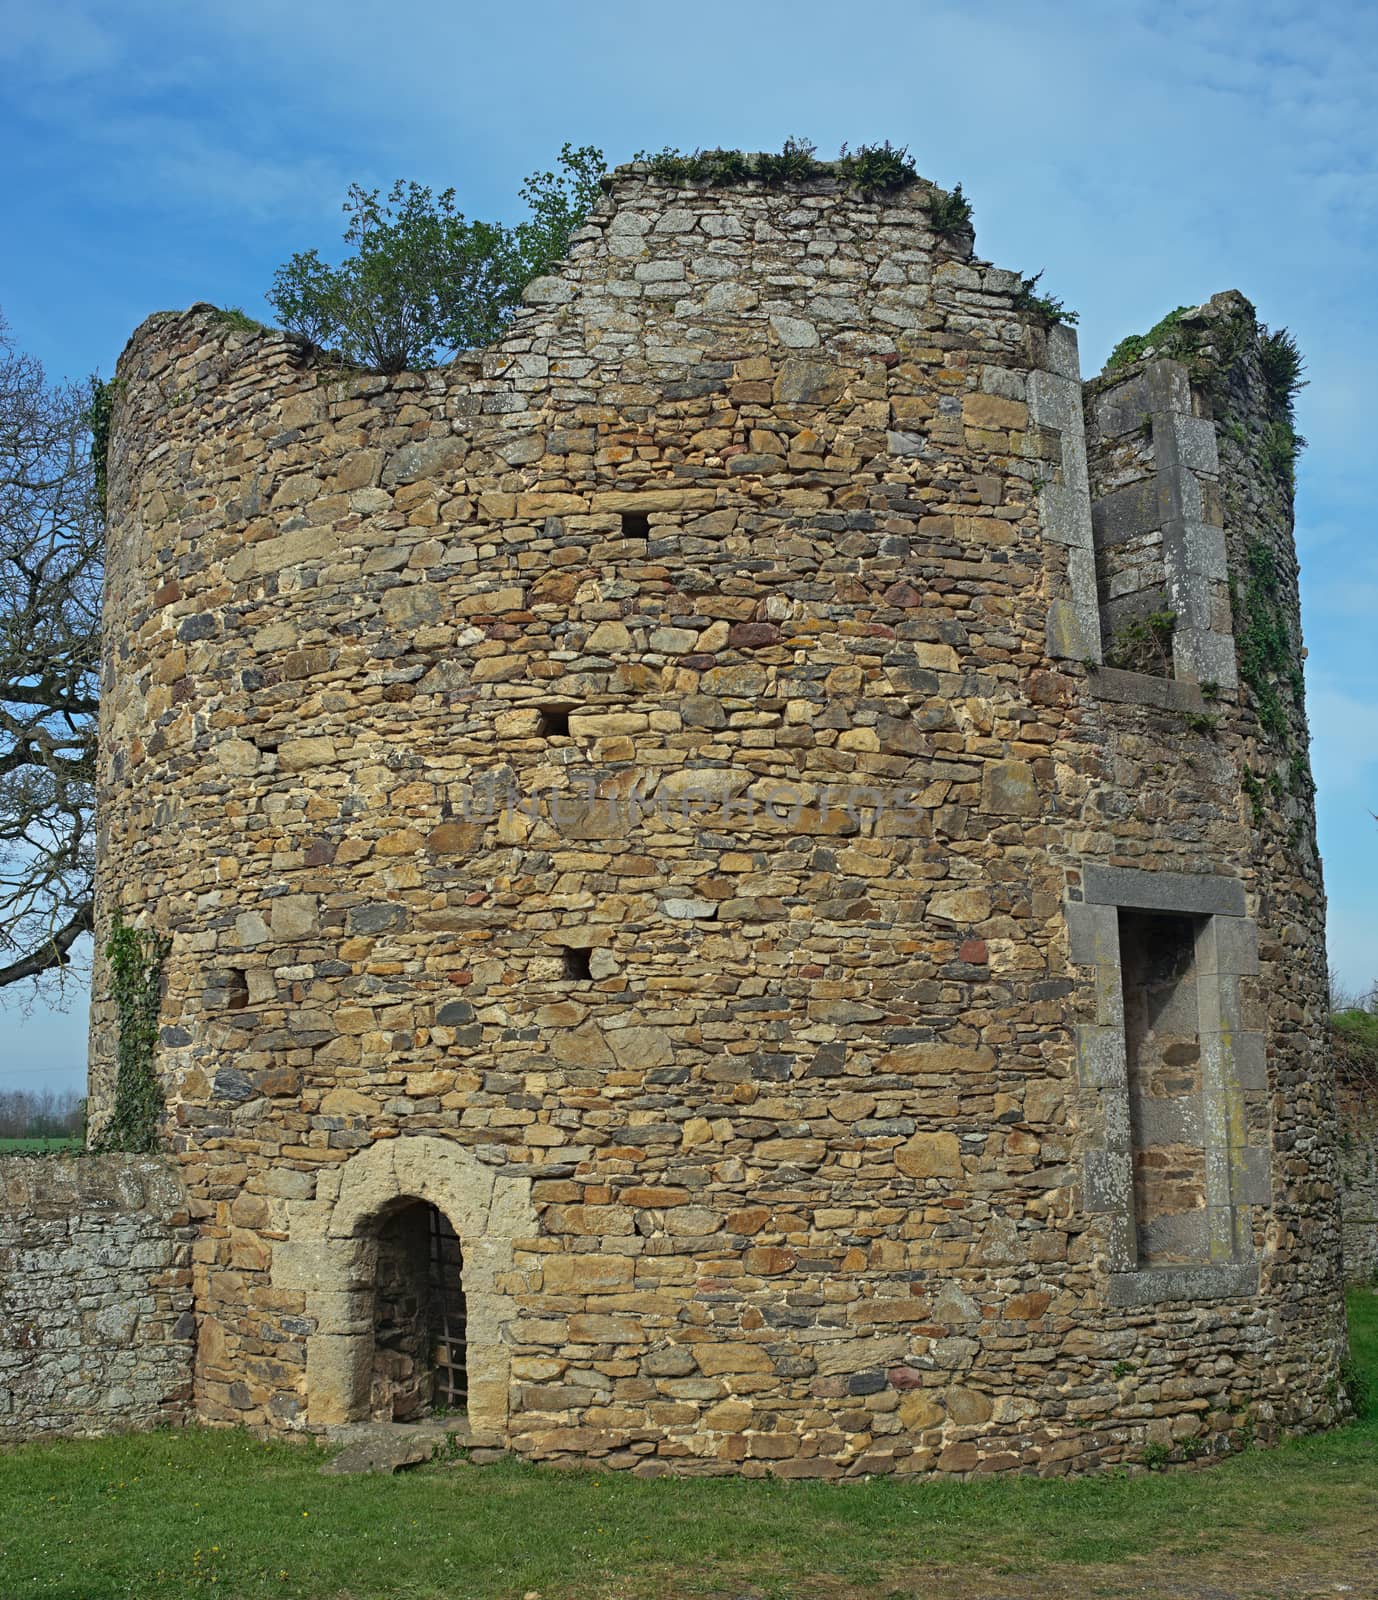 Remaining of an stone towers on an 16th century castle by sheriffkule